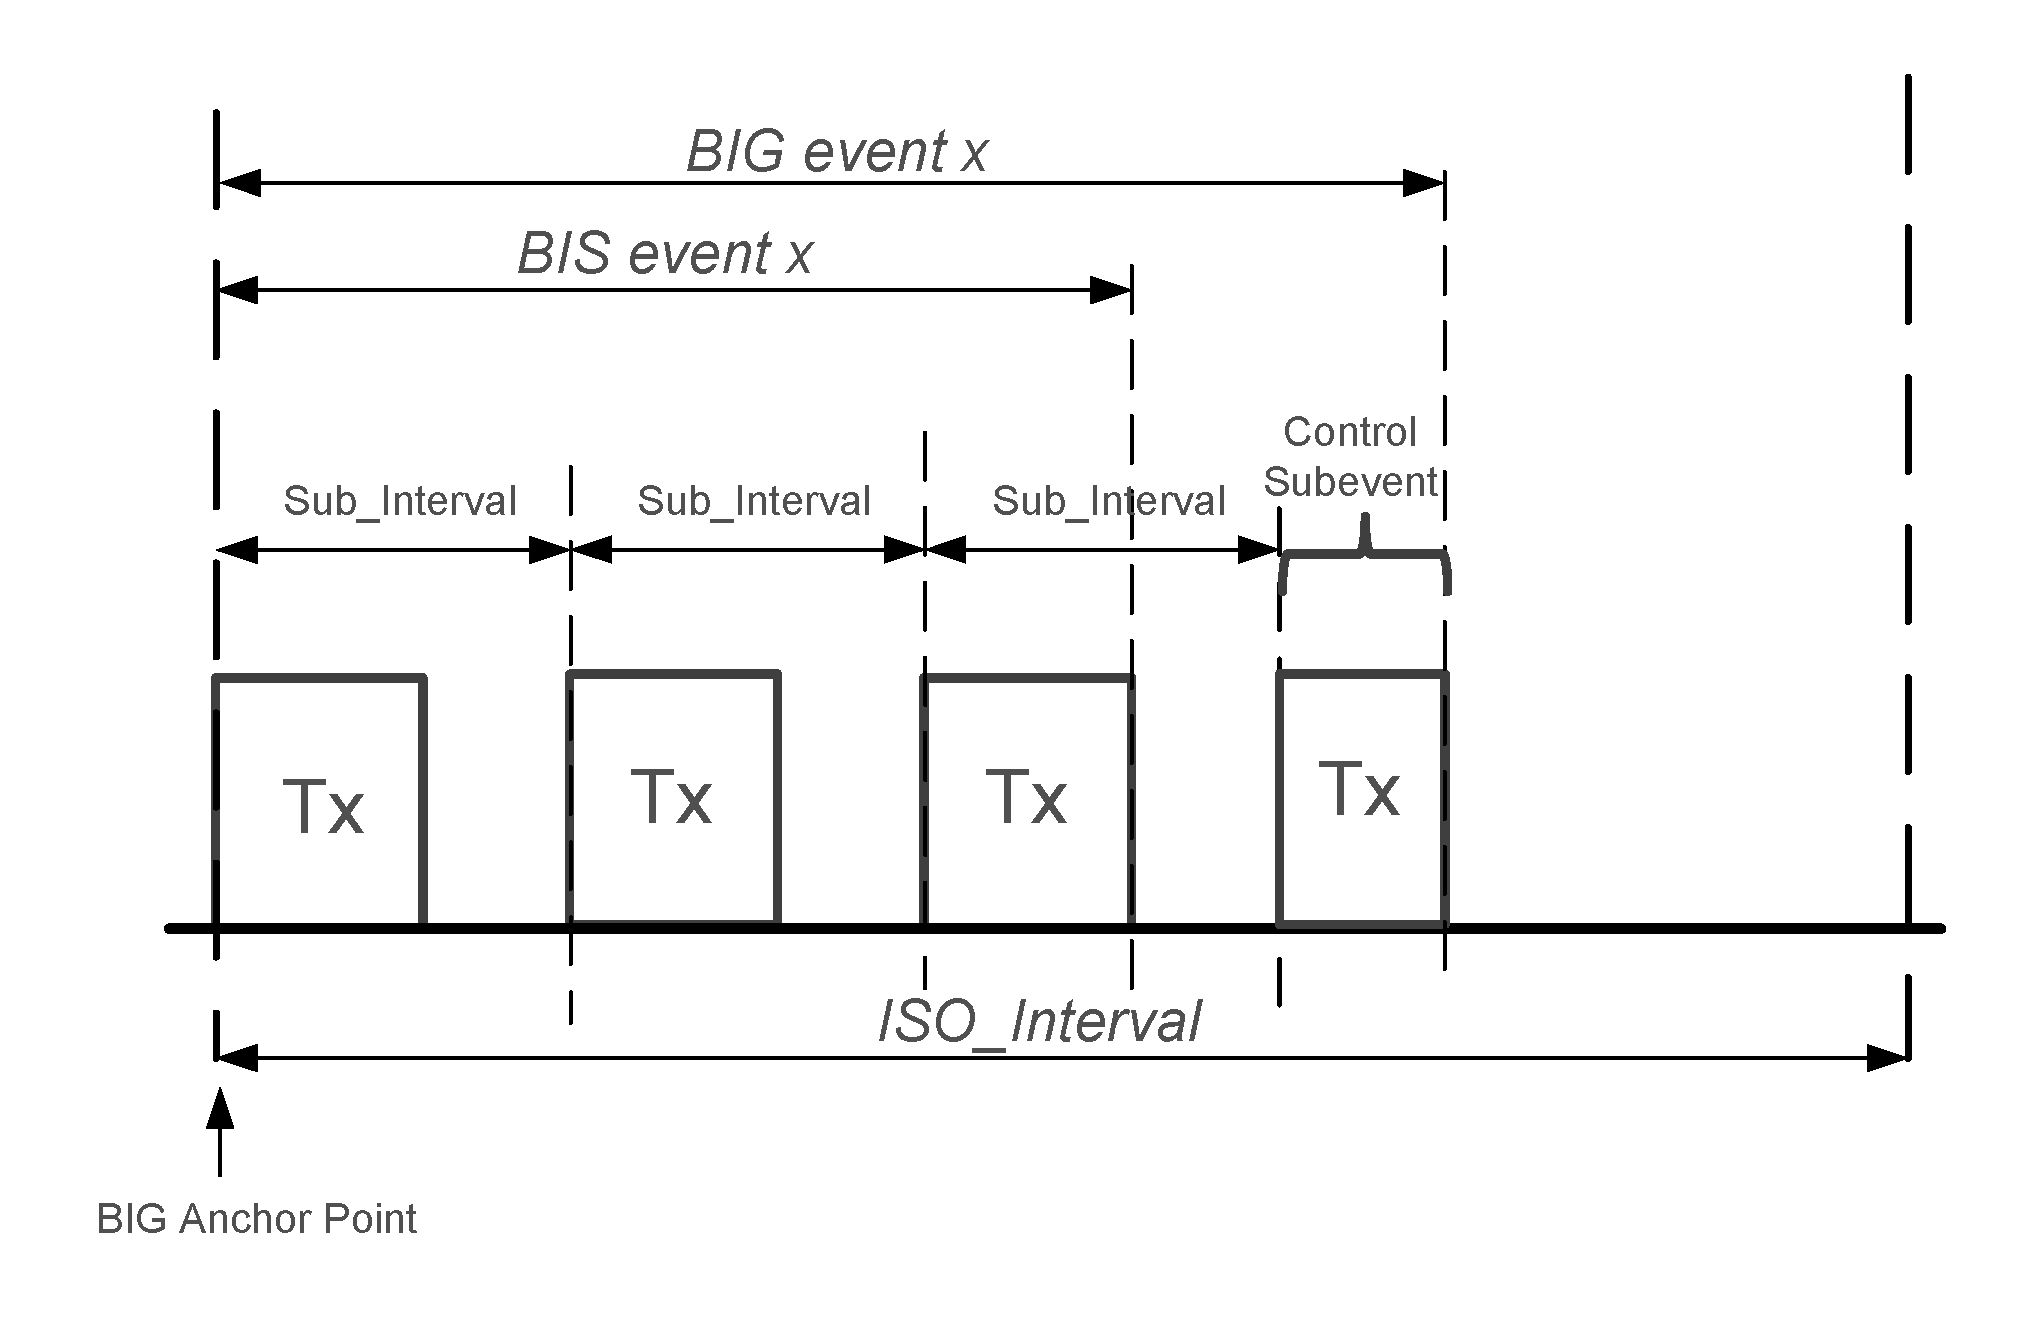 Example of BIG and BIS events